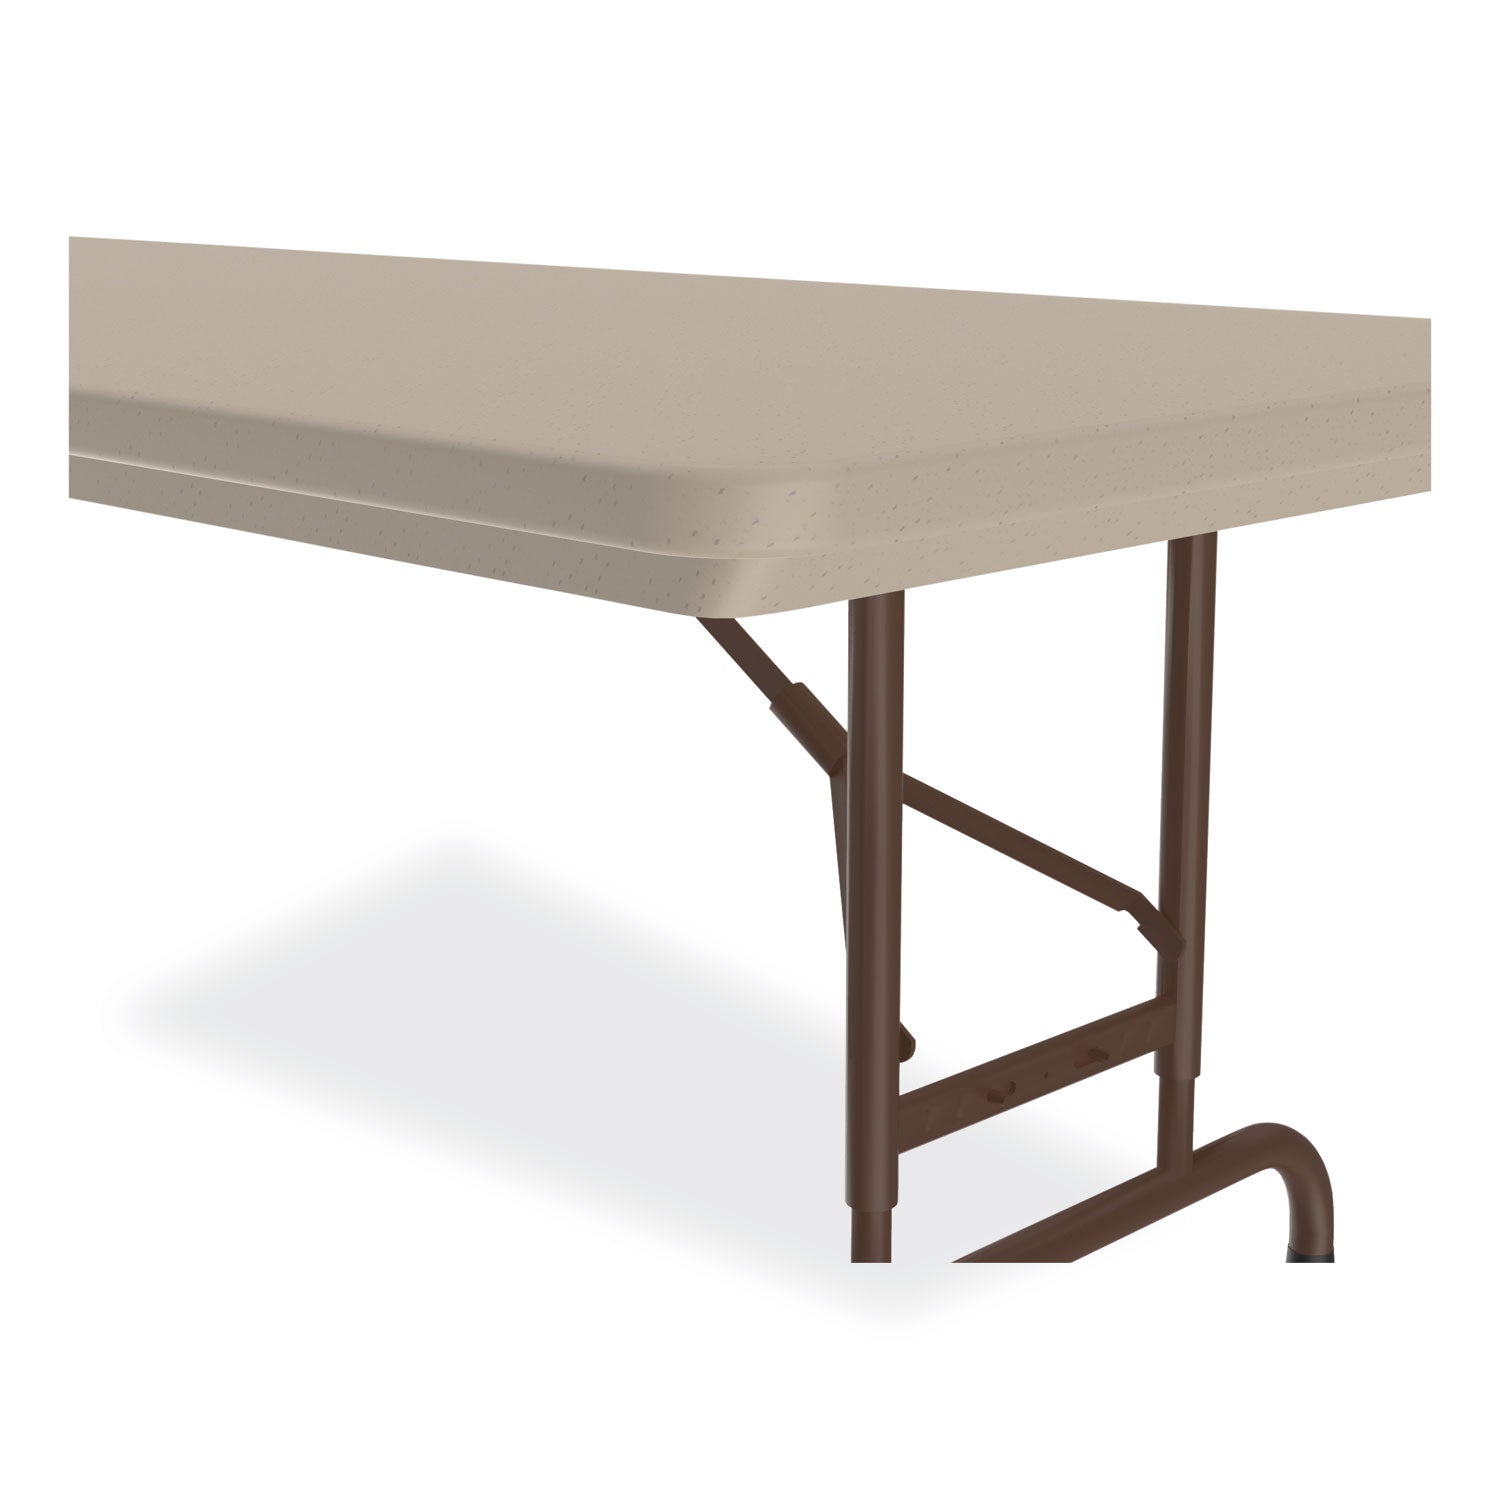 adjustable-folding-tables-rectangular-96-x-30-x-22-to-32-mocha-top-brown-legs-4-pallet-ships-in-4-6-business-days_crlra3096244p - 5